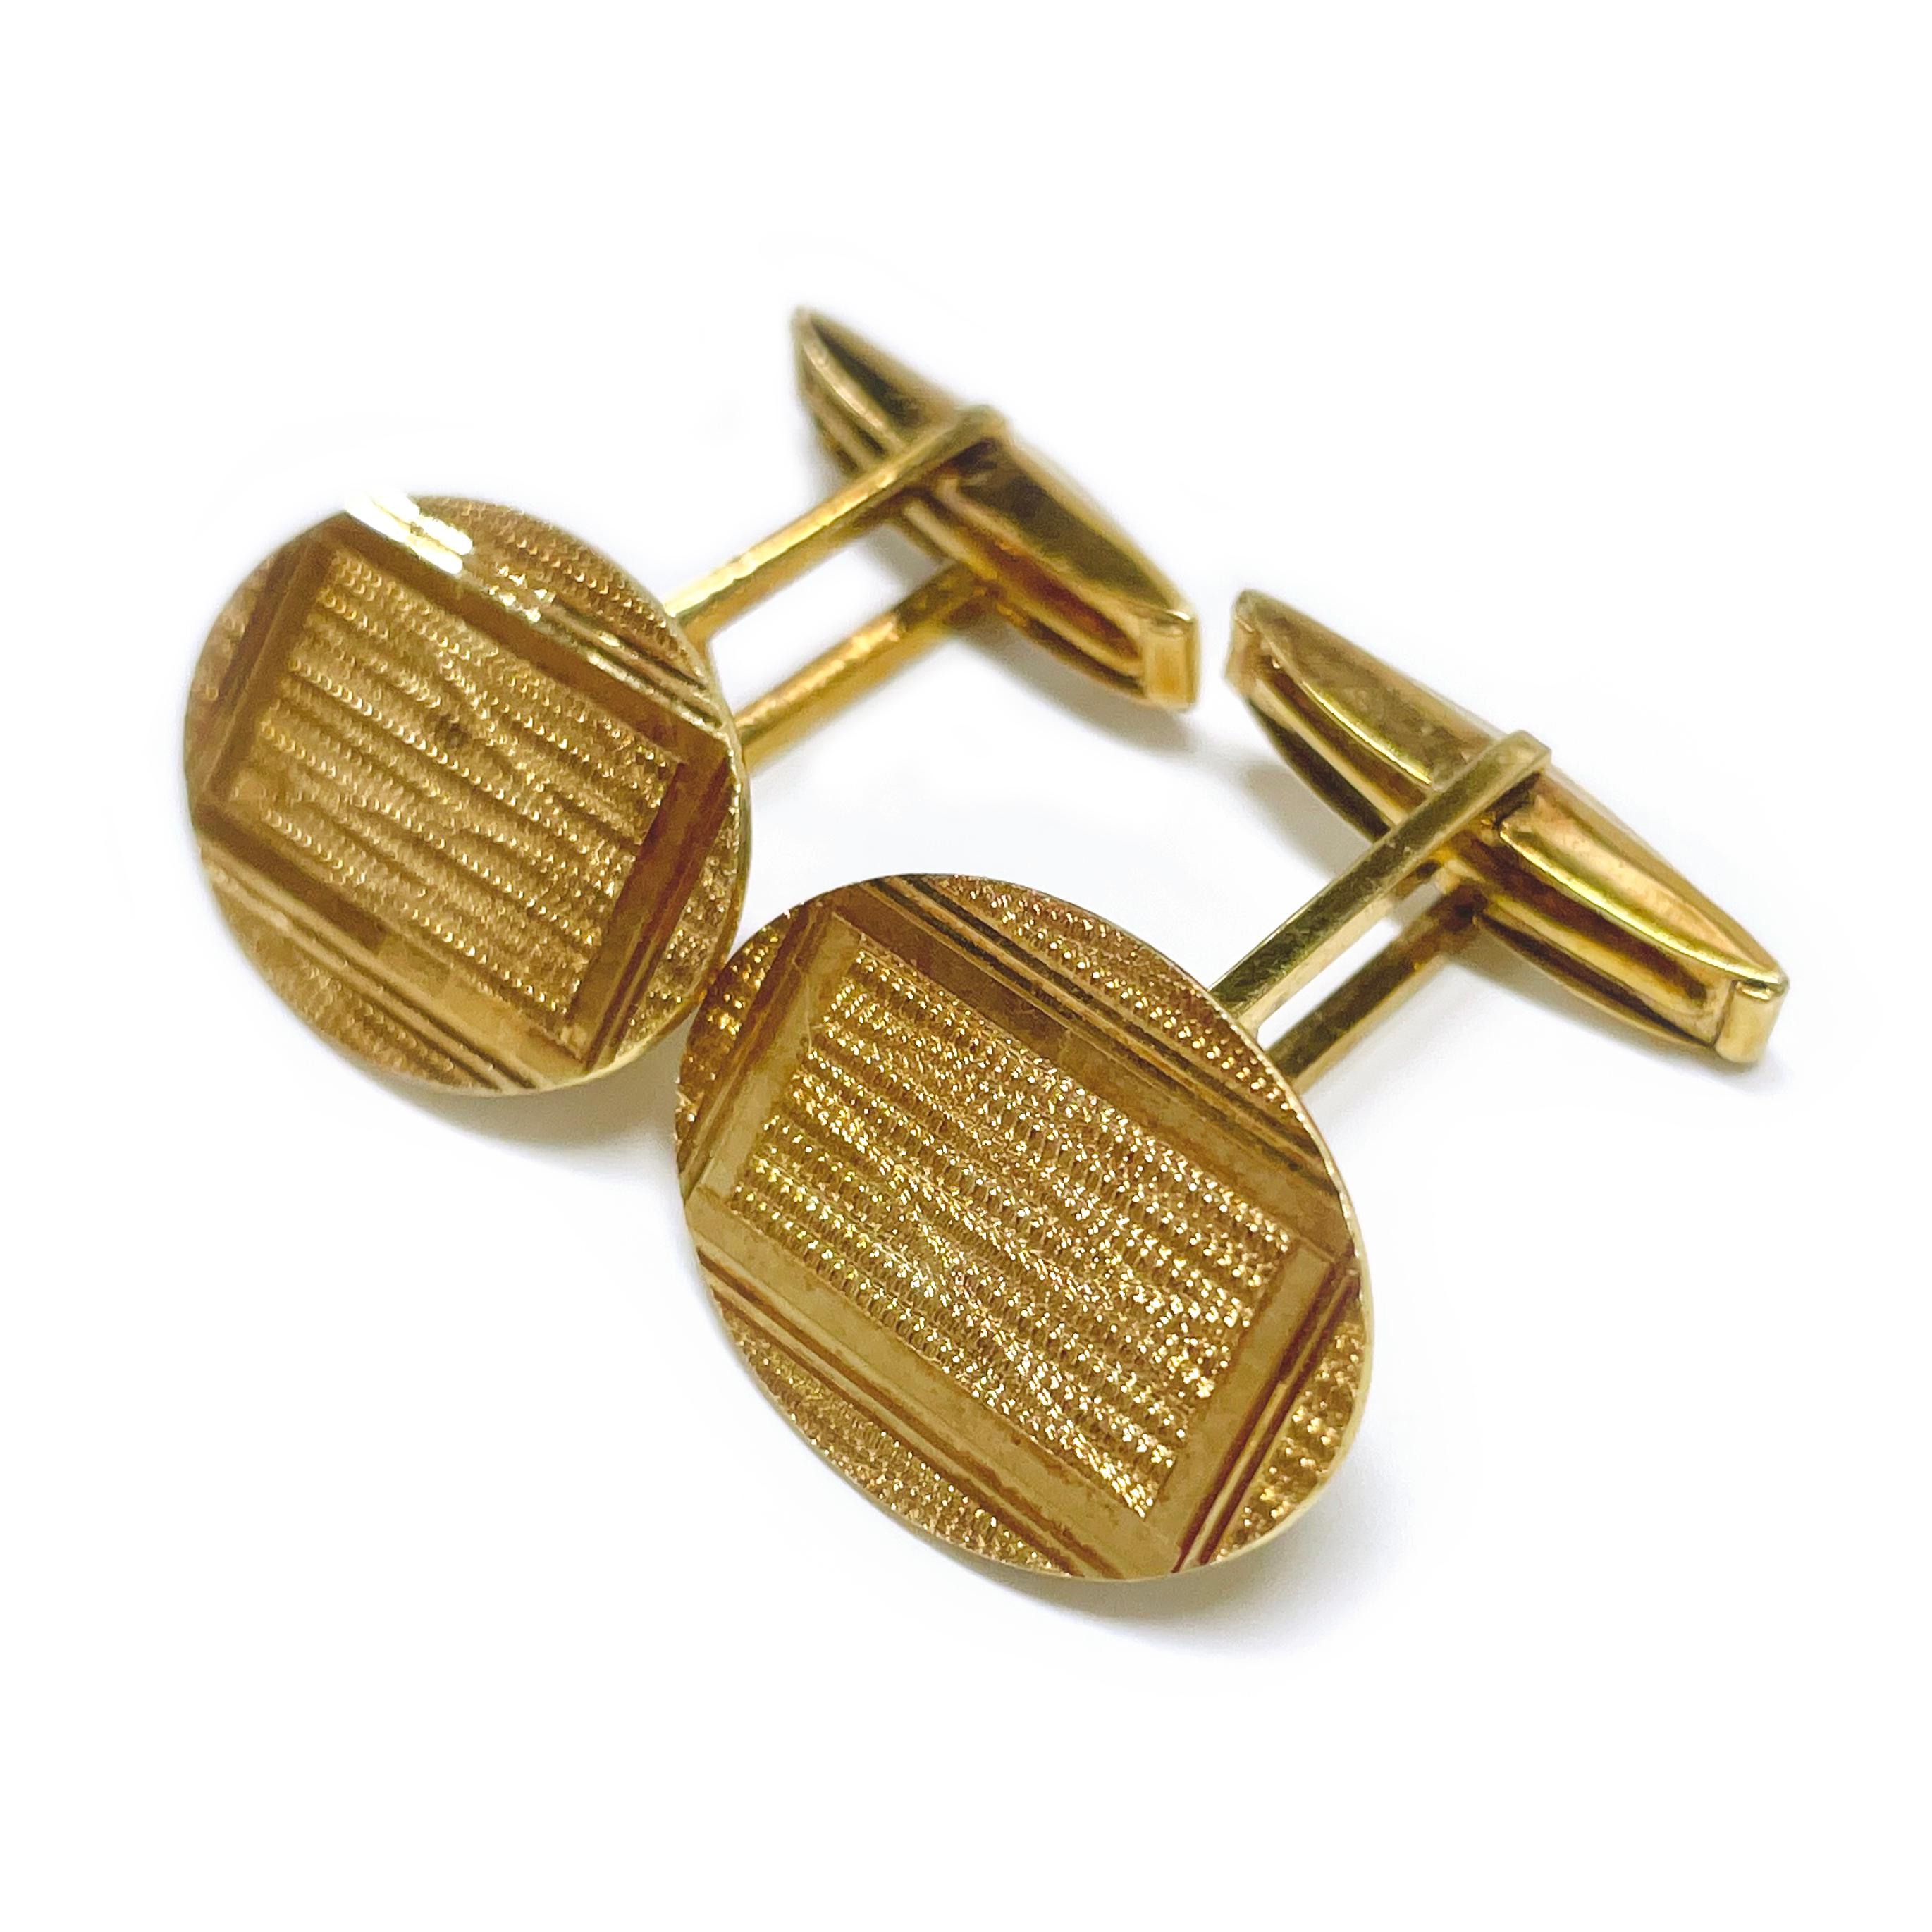 Yellow Gold Textured Cufflinks. The oval cufflinks have textured fronts with a smooth shiny rectangle. The cufflinks have a dual post and whale tail backings. The cufflink fronts measure approximately 20.5mm by 14.6mm. The cufflink front and post